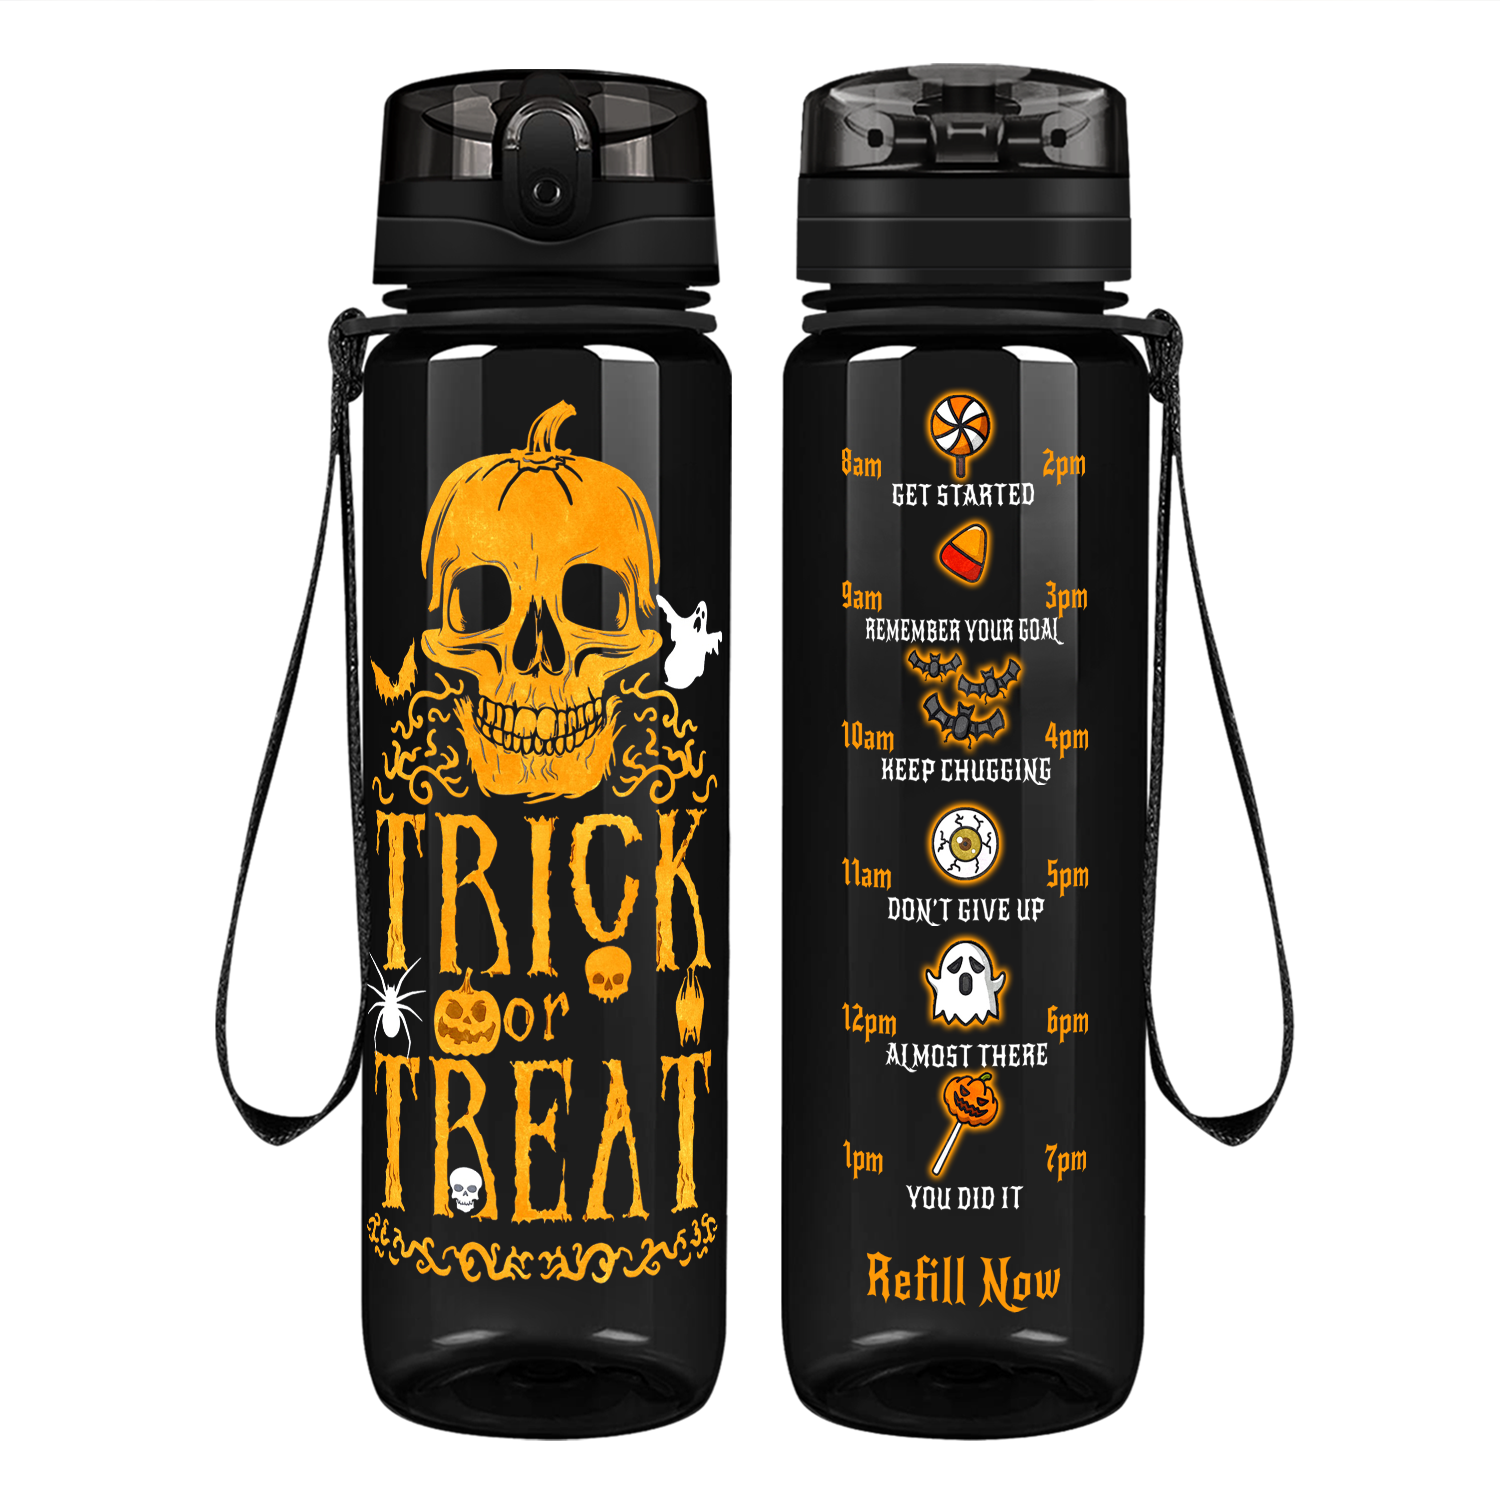 Trick or Treat on 32 oz Motivational Tracking Water Bottle